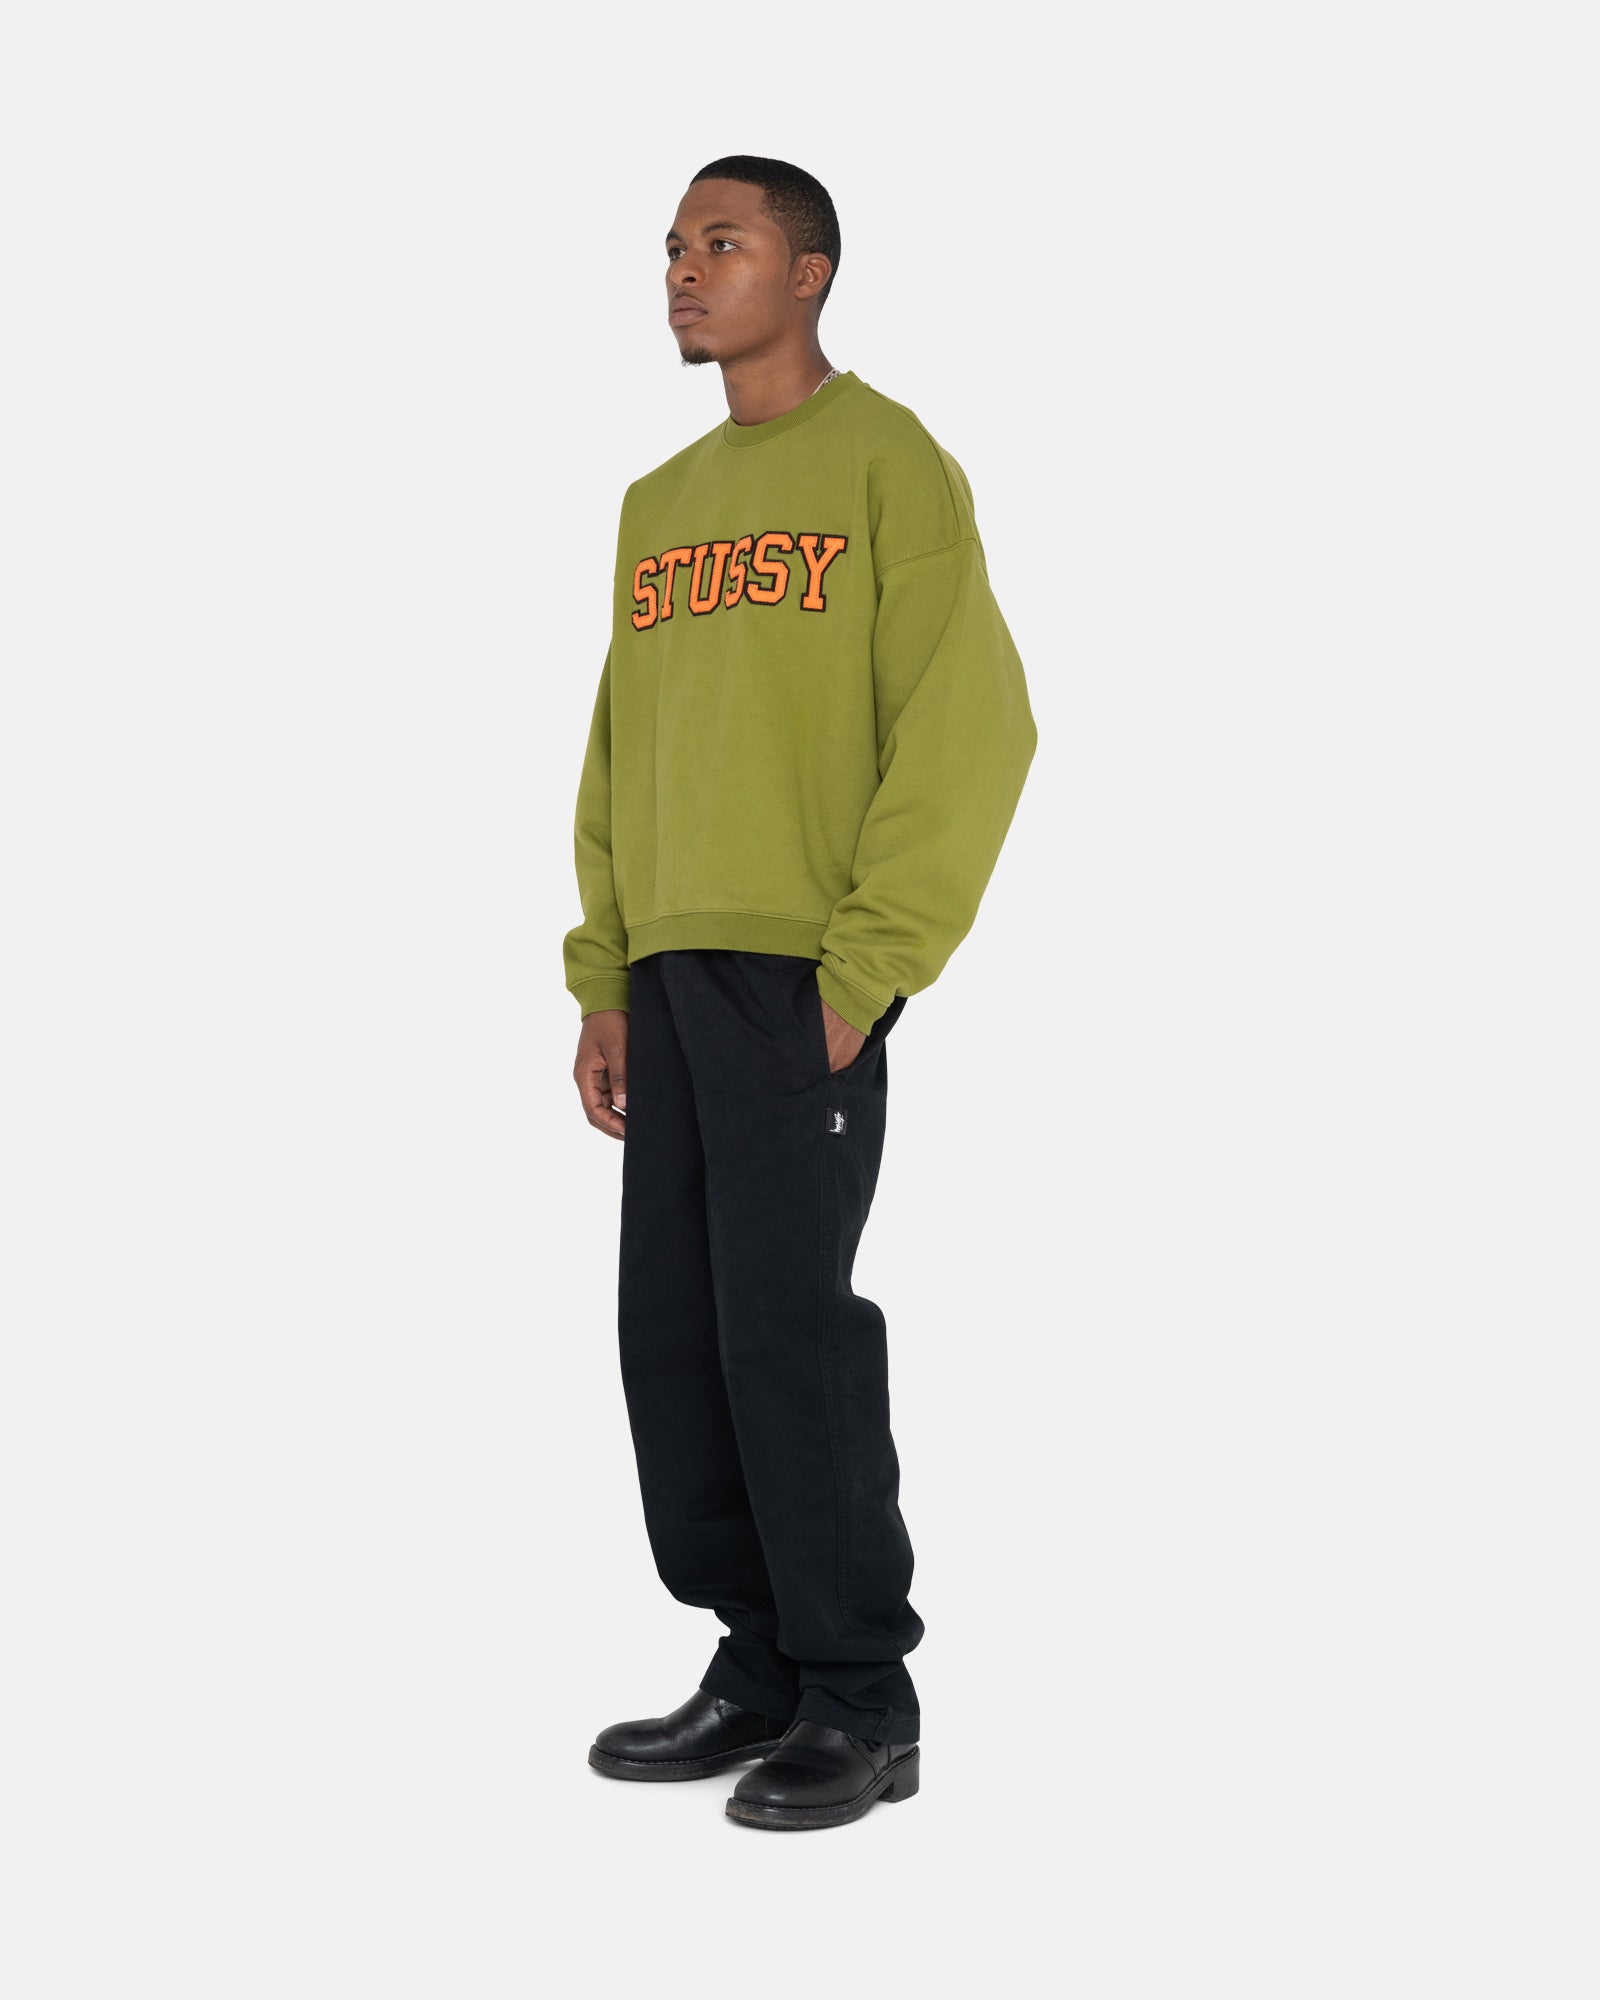 STTUSY 22AW RELAXED OVERSIZED CREW